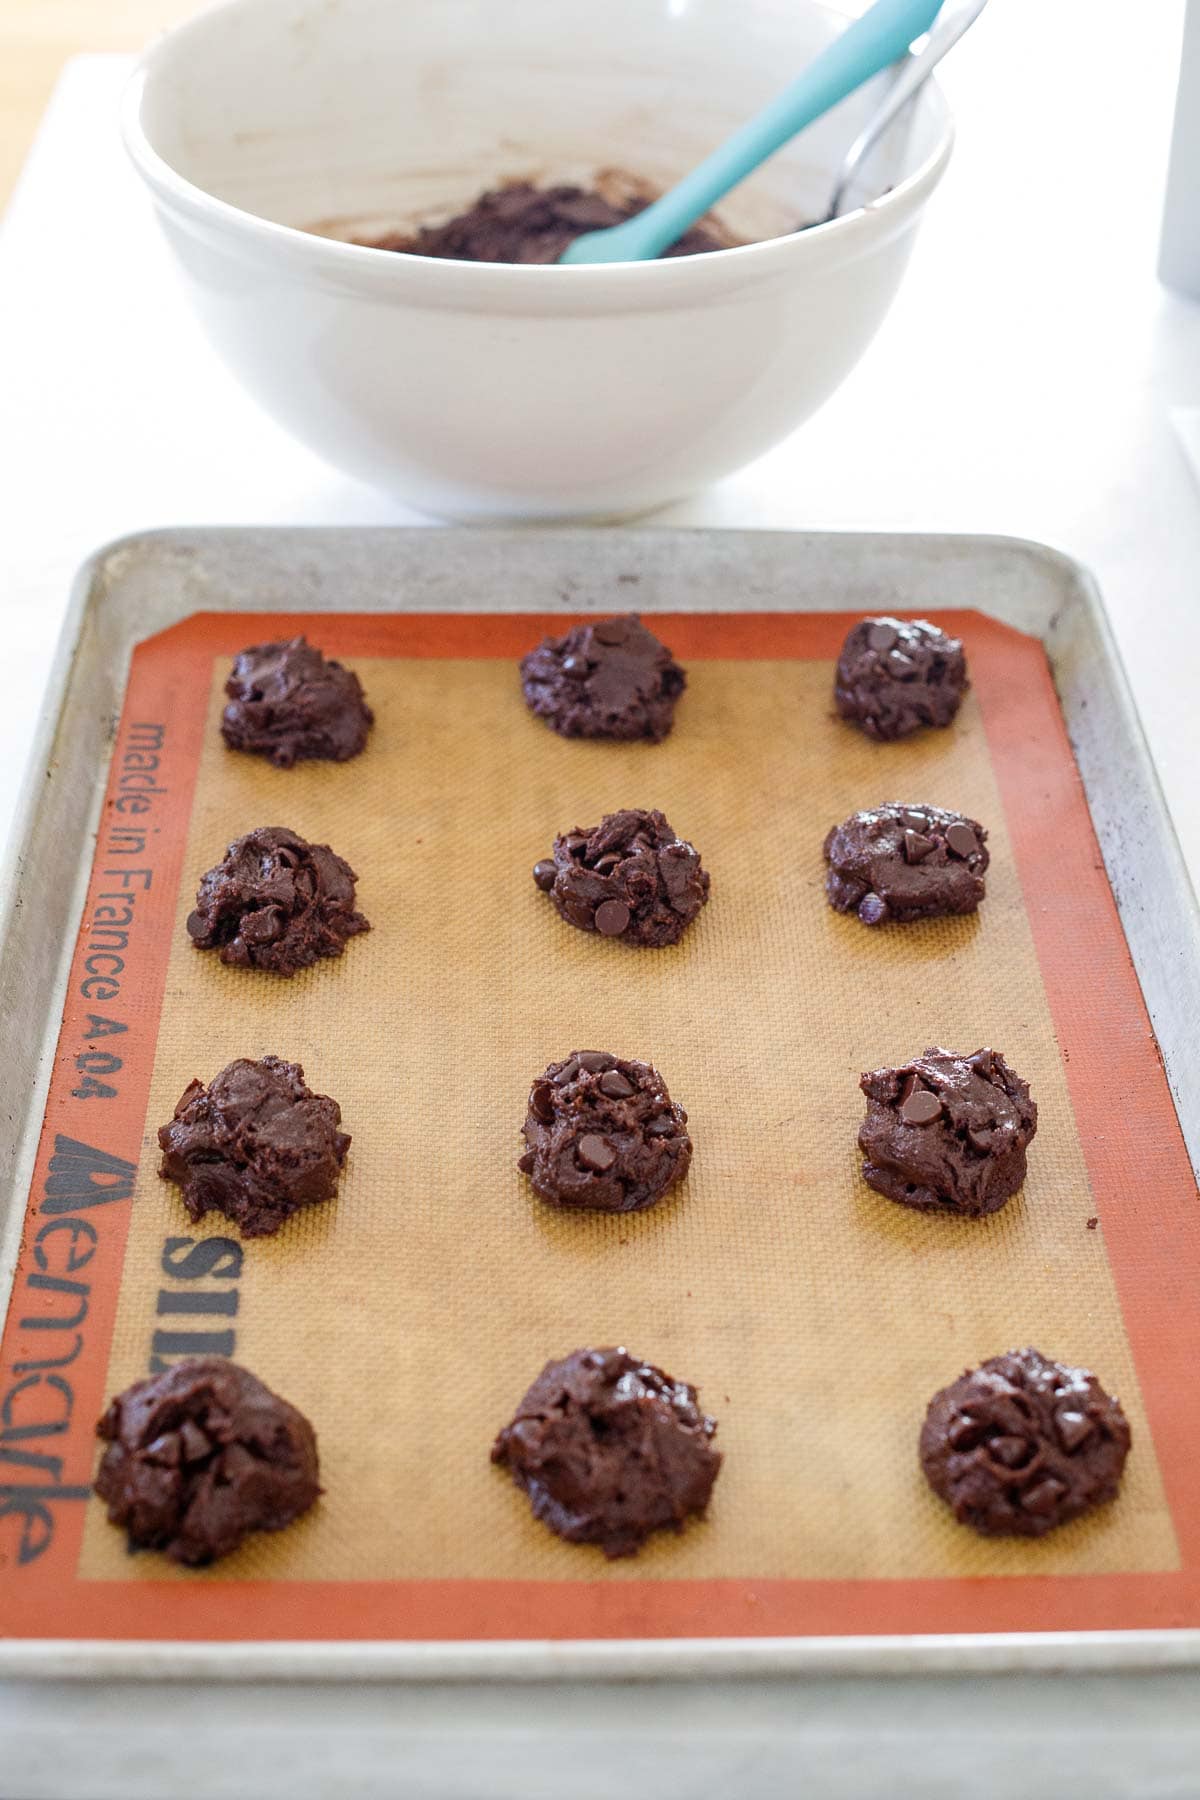 double chocolate chip cookie dough balls spread out evenly on silpat on baking sheet